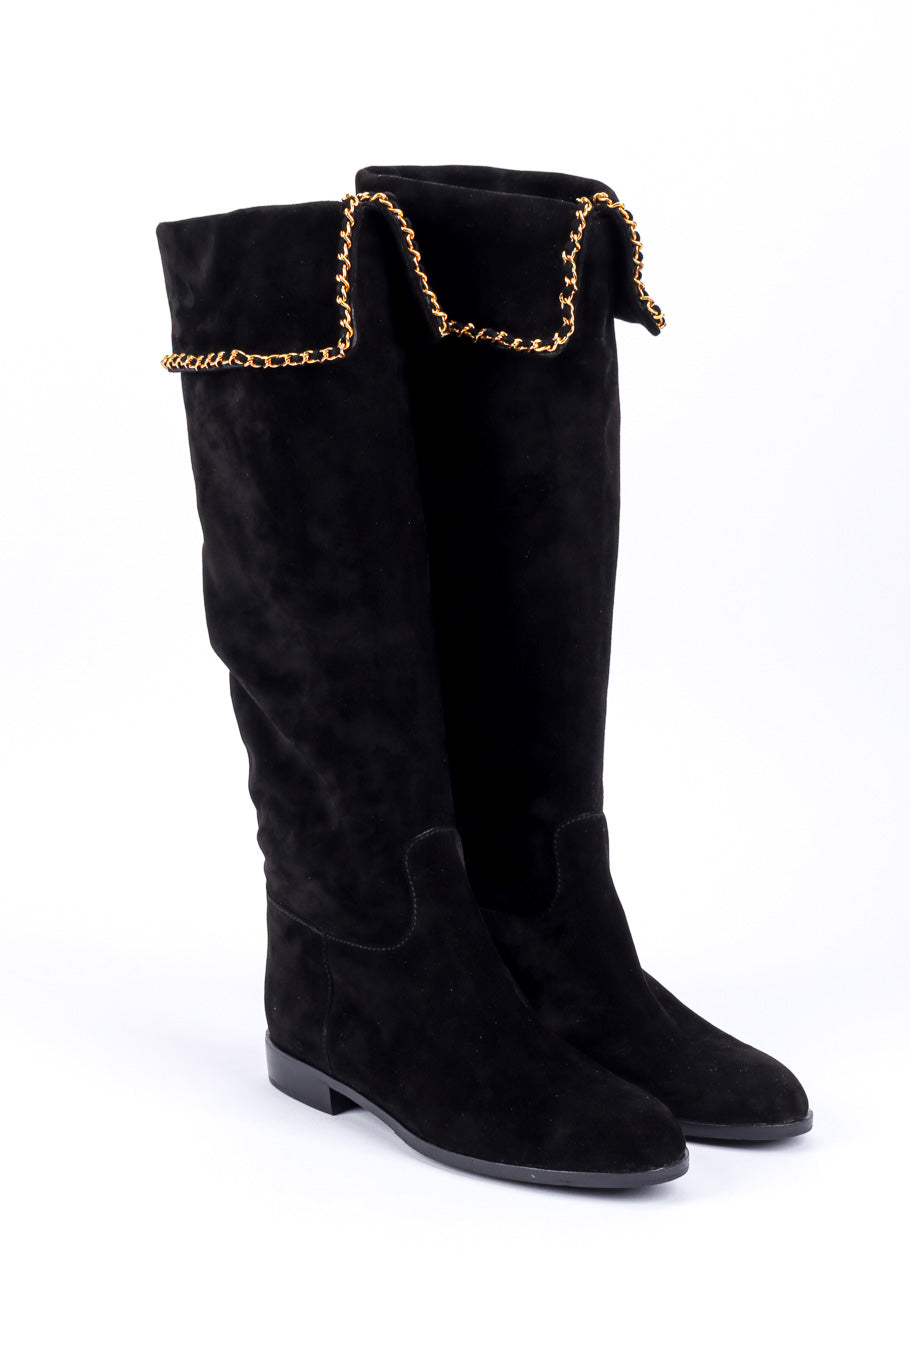 Vintage Chanel Chainlink and Suede Riding Boots 3/4 front view @recessla